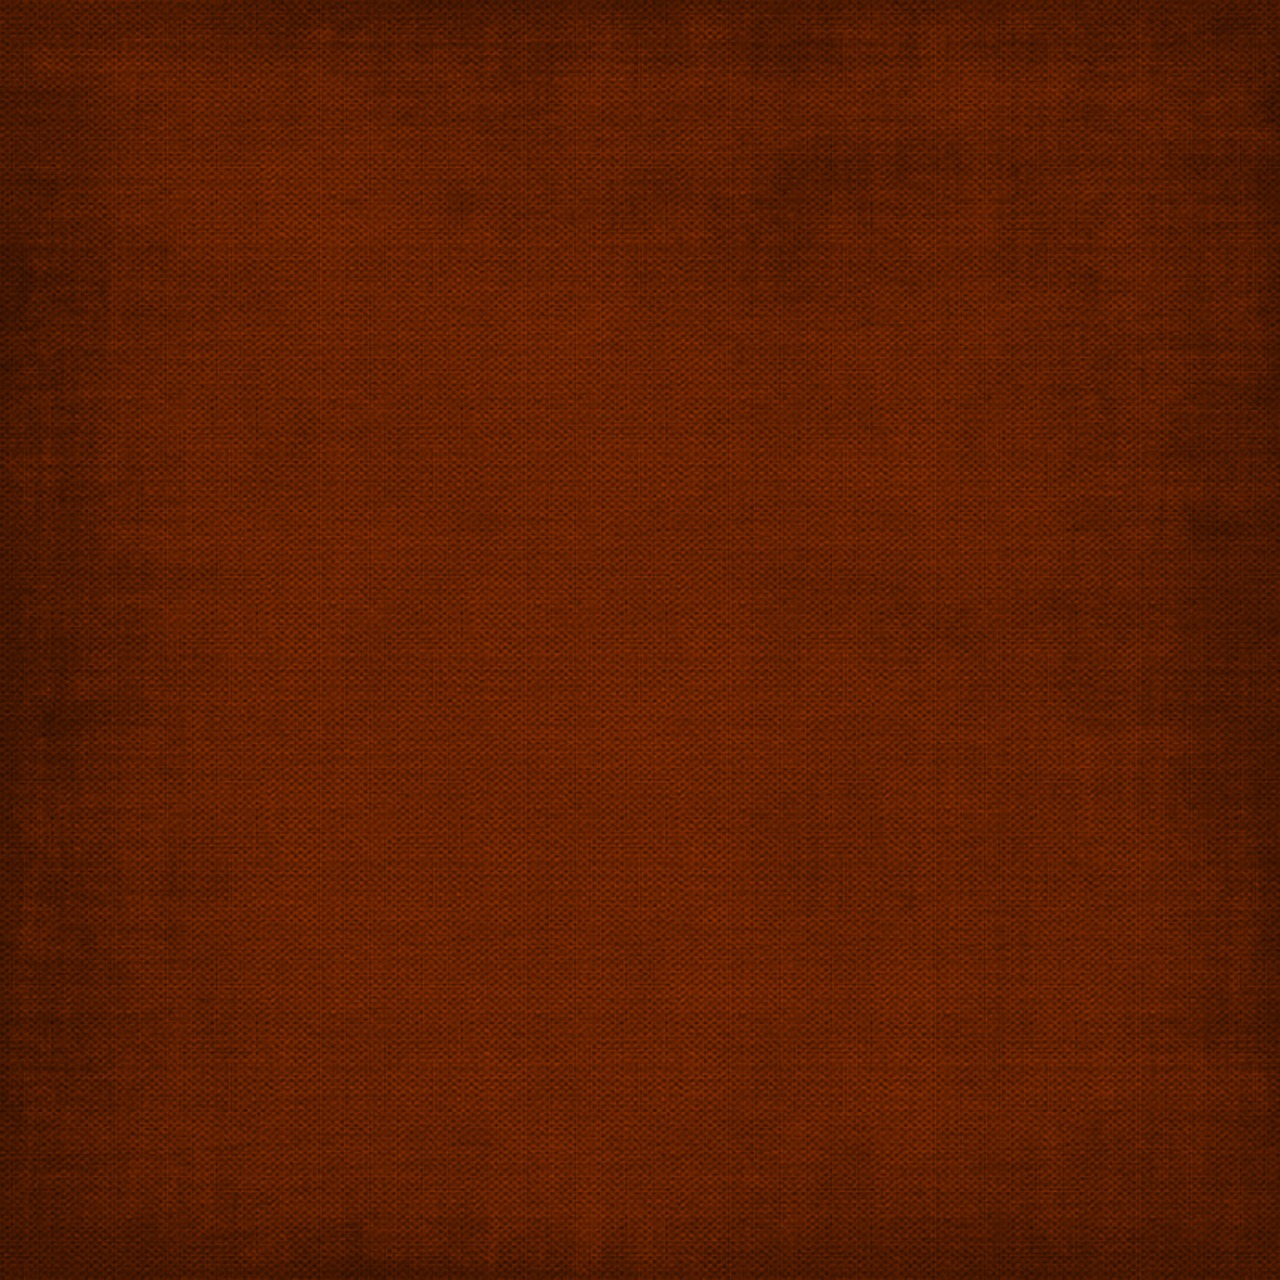 Brown Leather Effect Background Free Stock Photo - Public Domain Pictures